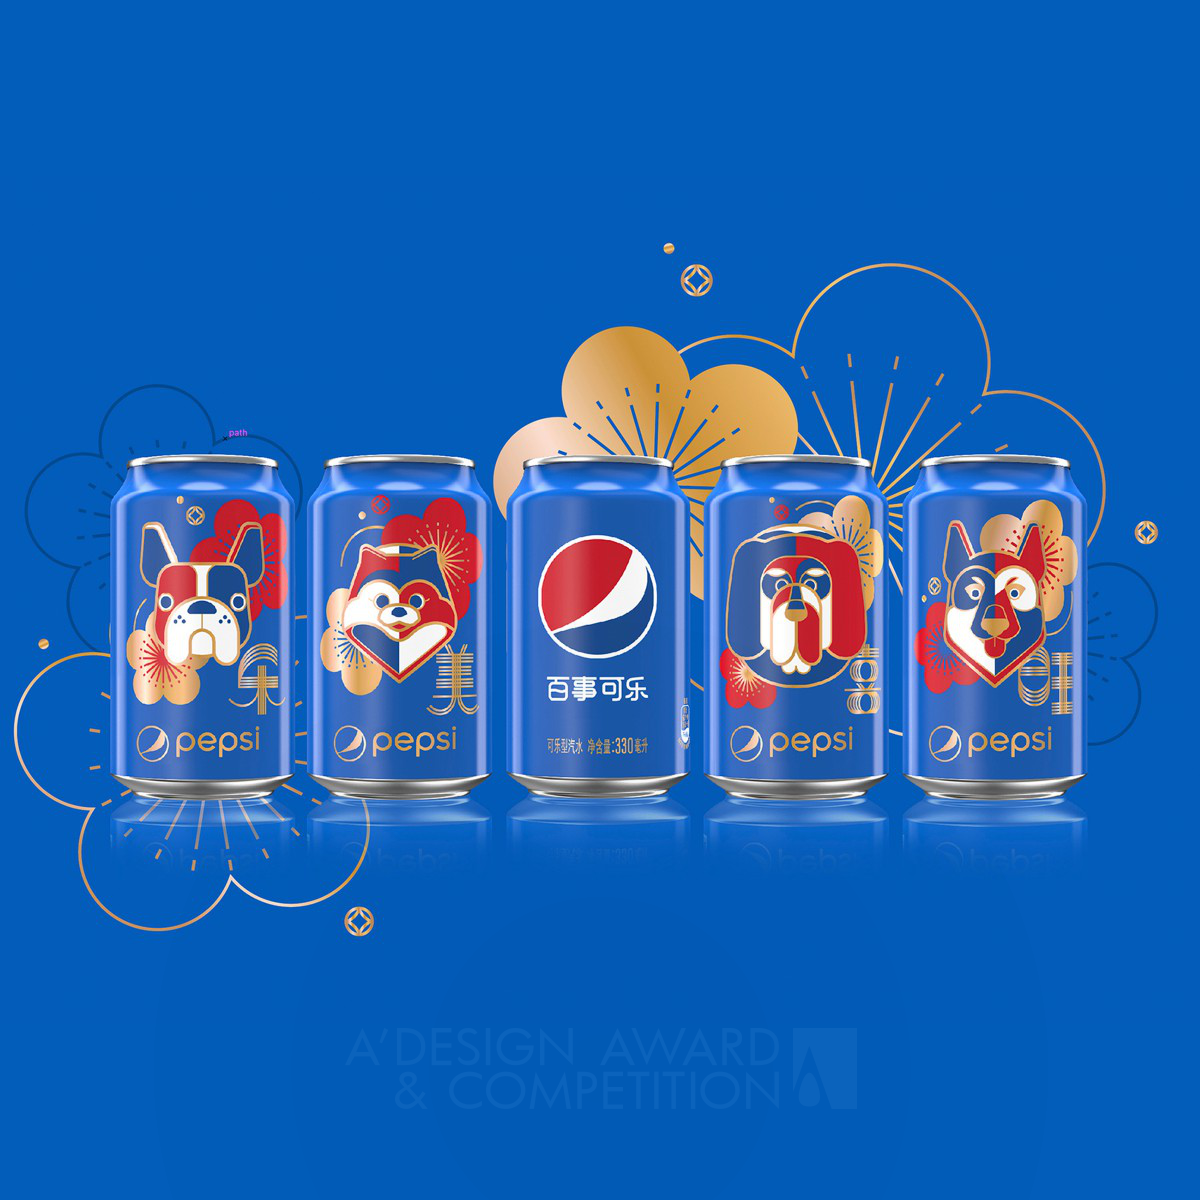 Pepsi China CNY Year of the Dog Brand Packaging by PepsiCo Design & Innovation